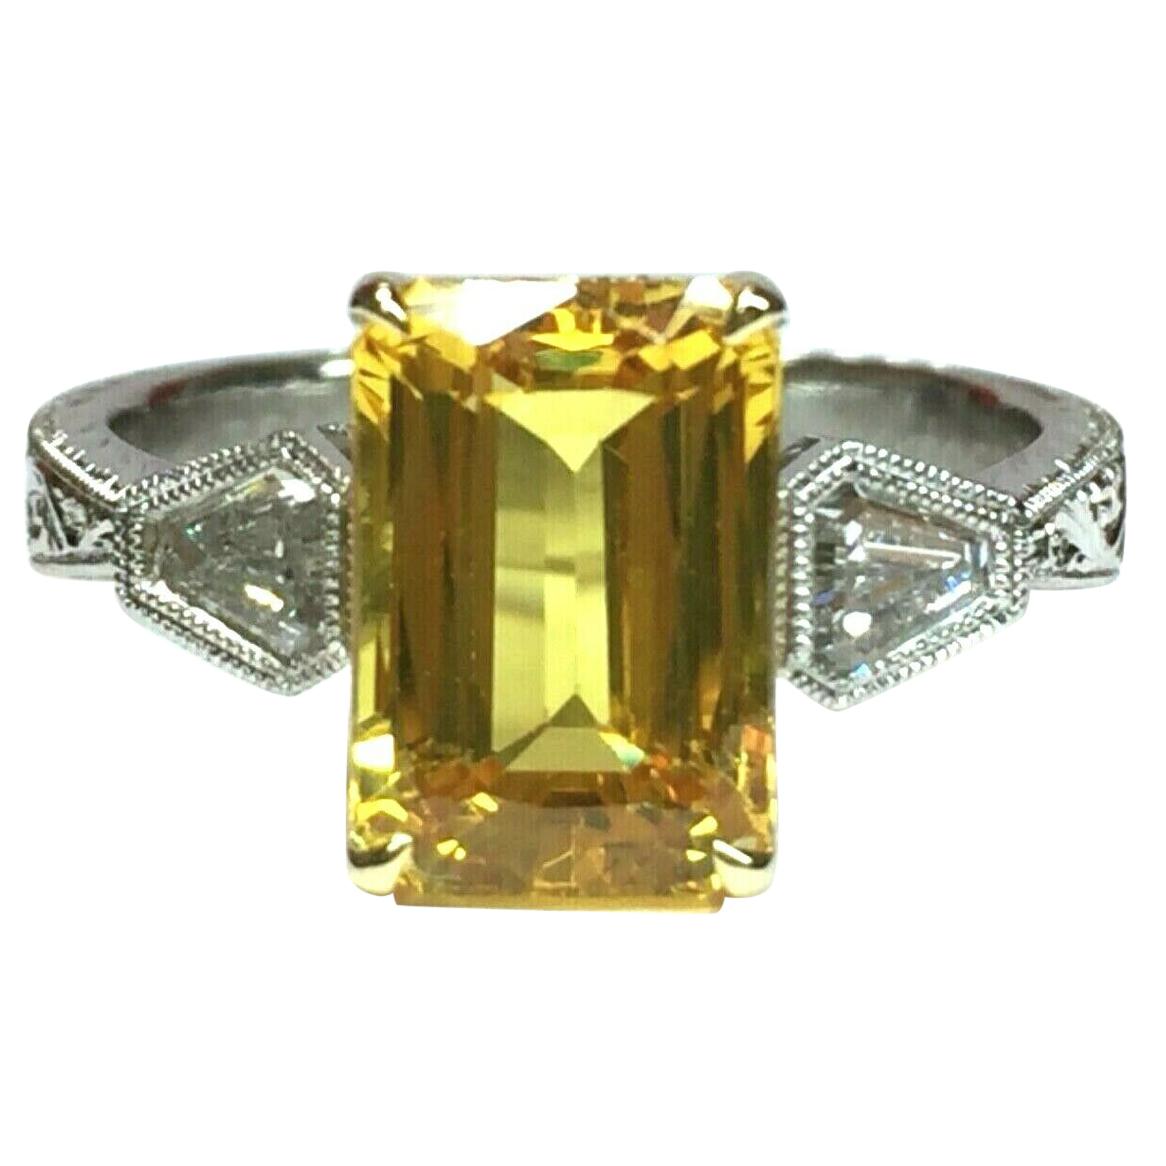 4.02 Carat Natural Yellow Sapphire and Diamond Ring GIA Certified For Sale